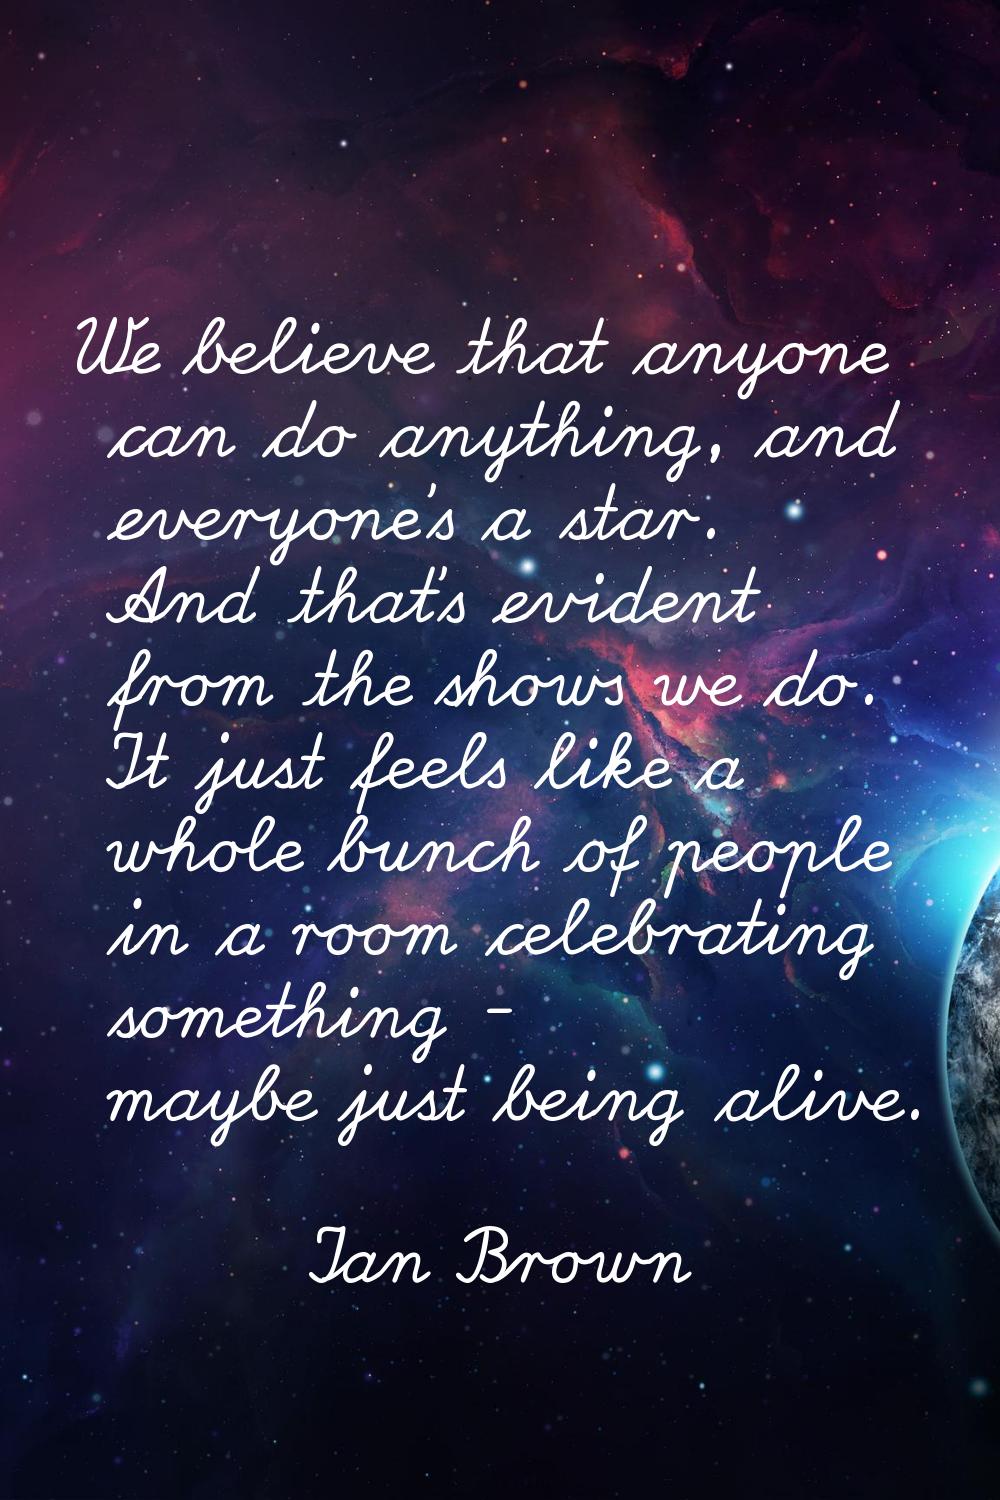 We believe that anyone can do anything, and everyone's a star. And that's evident from the shows we